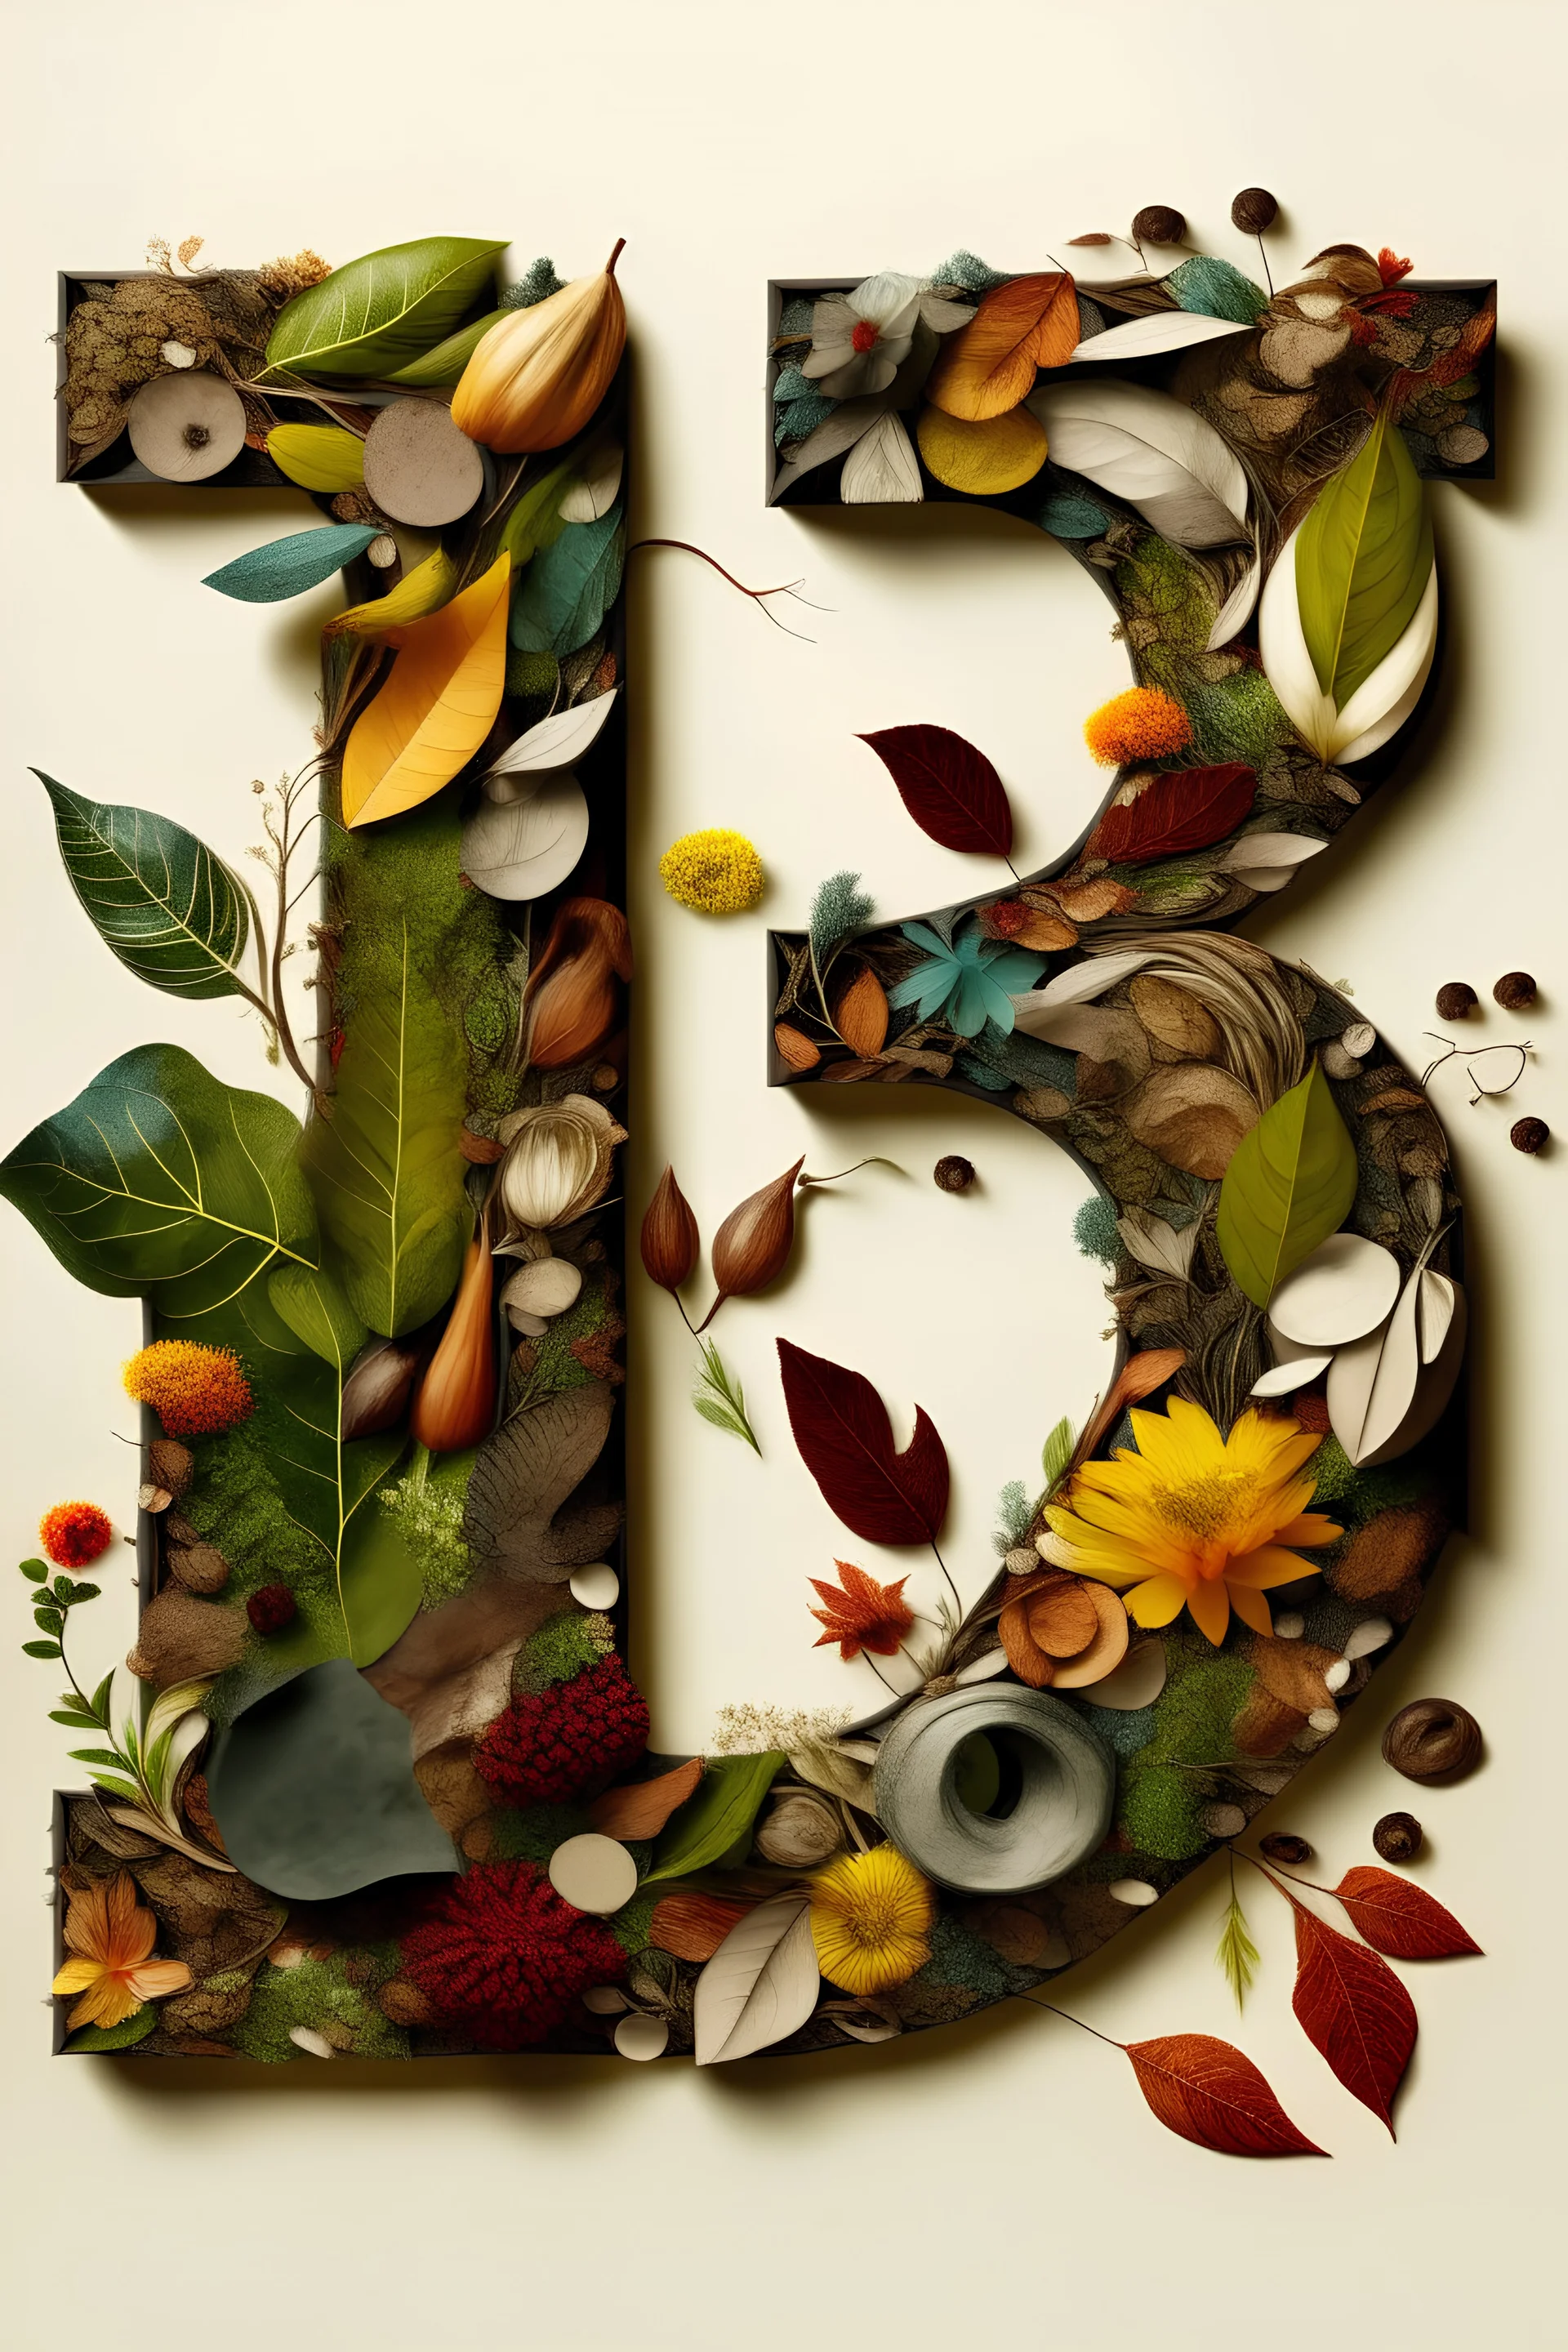 A collage-style image showcasing different natural elements like leaves, flowers, rocks, and branches creatively arranged to form each letter of the alphabet.